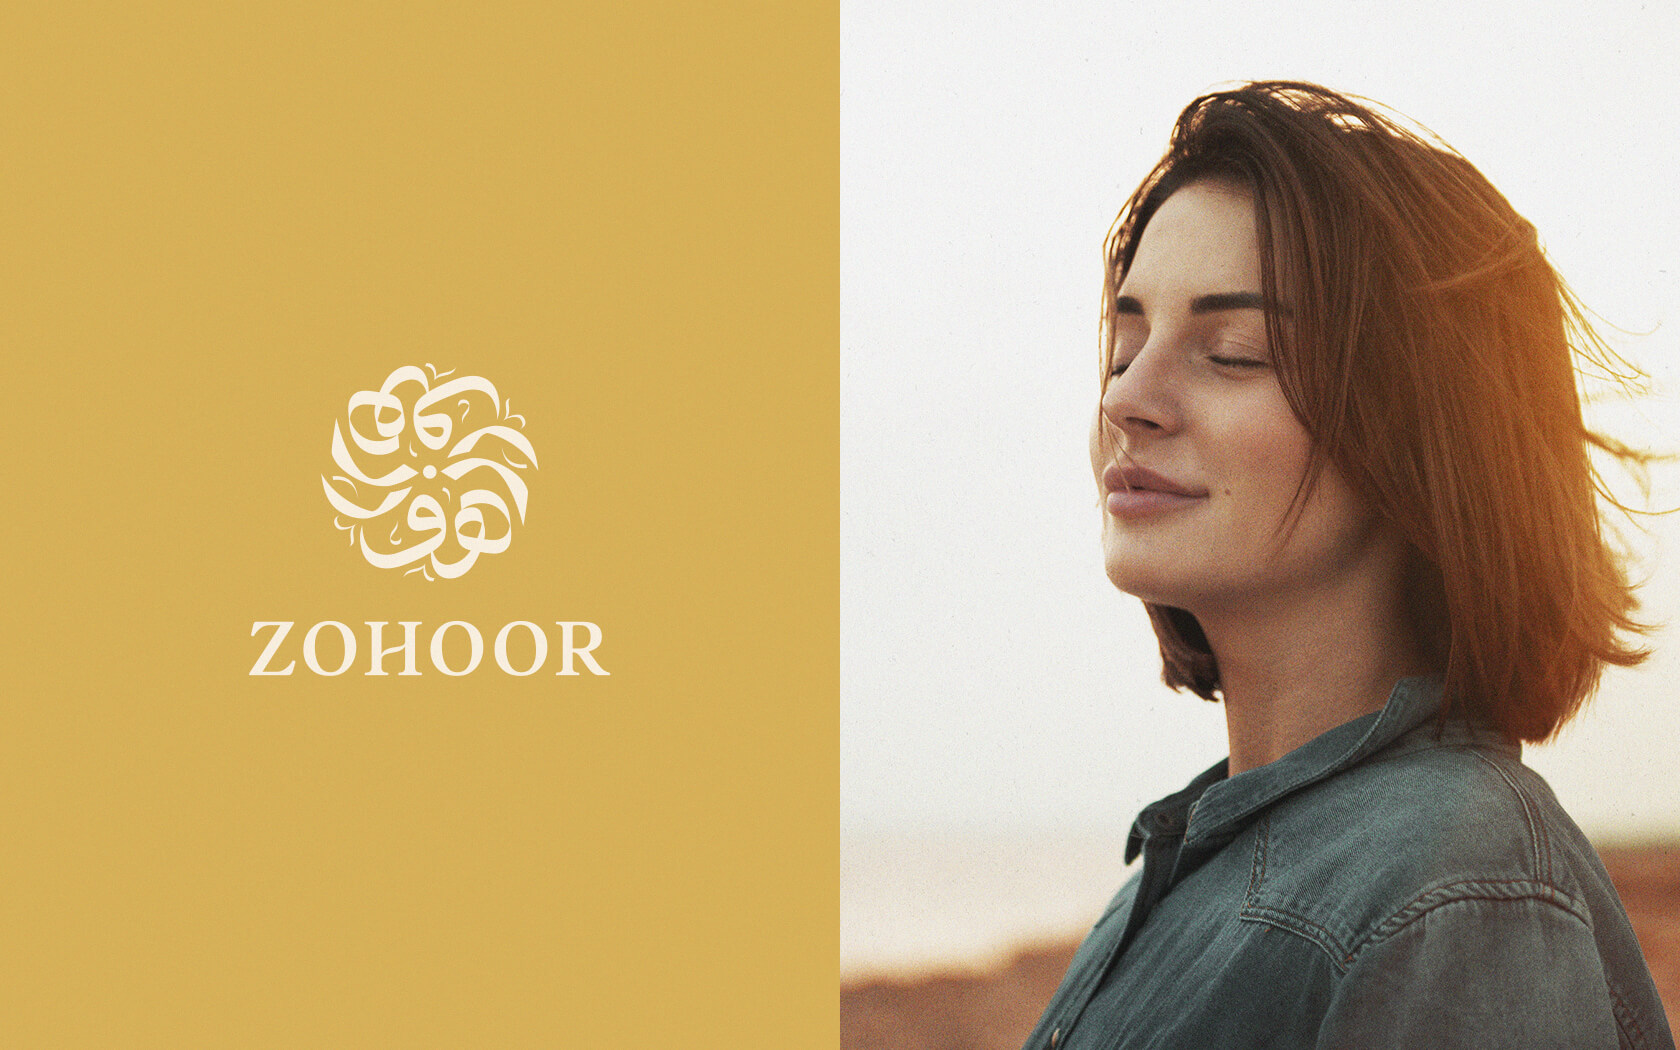 Zohoor. Brand logo in white on gold background